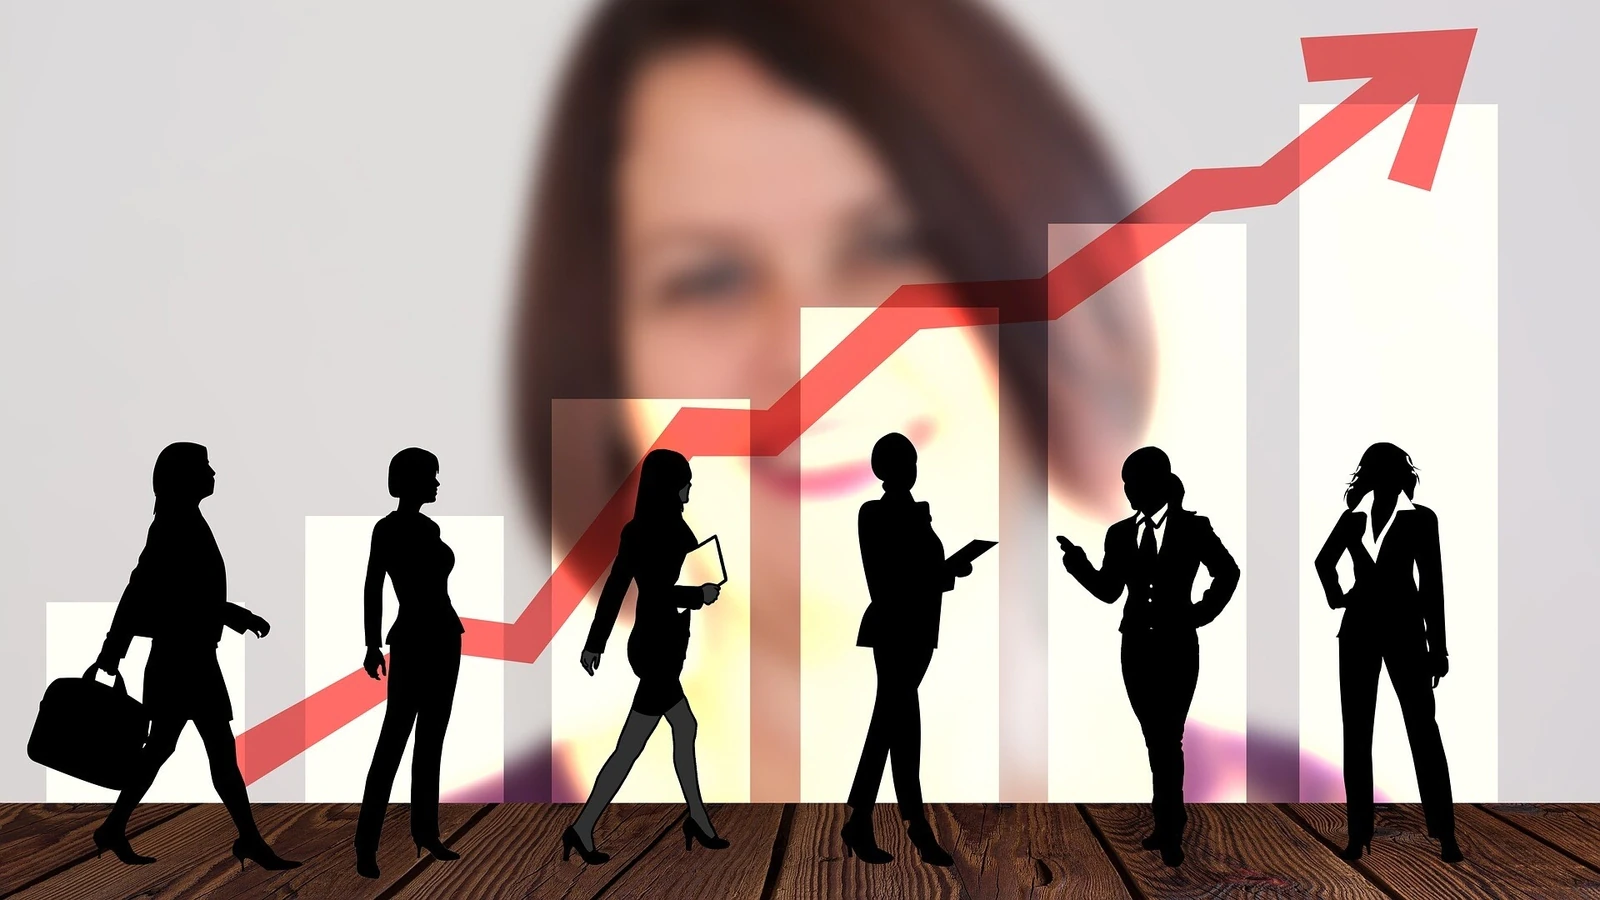 Passionate about advancing into leadership role? Here are top 3 tips for women